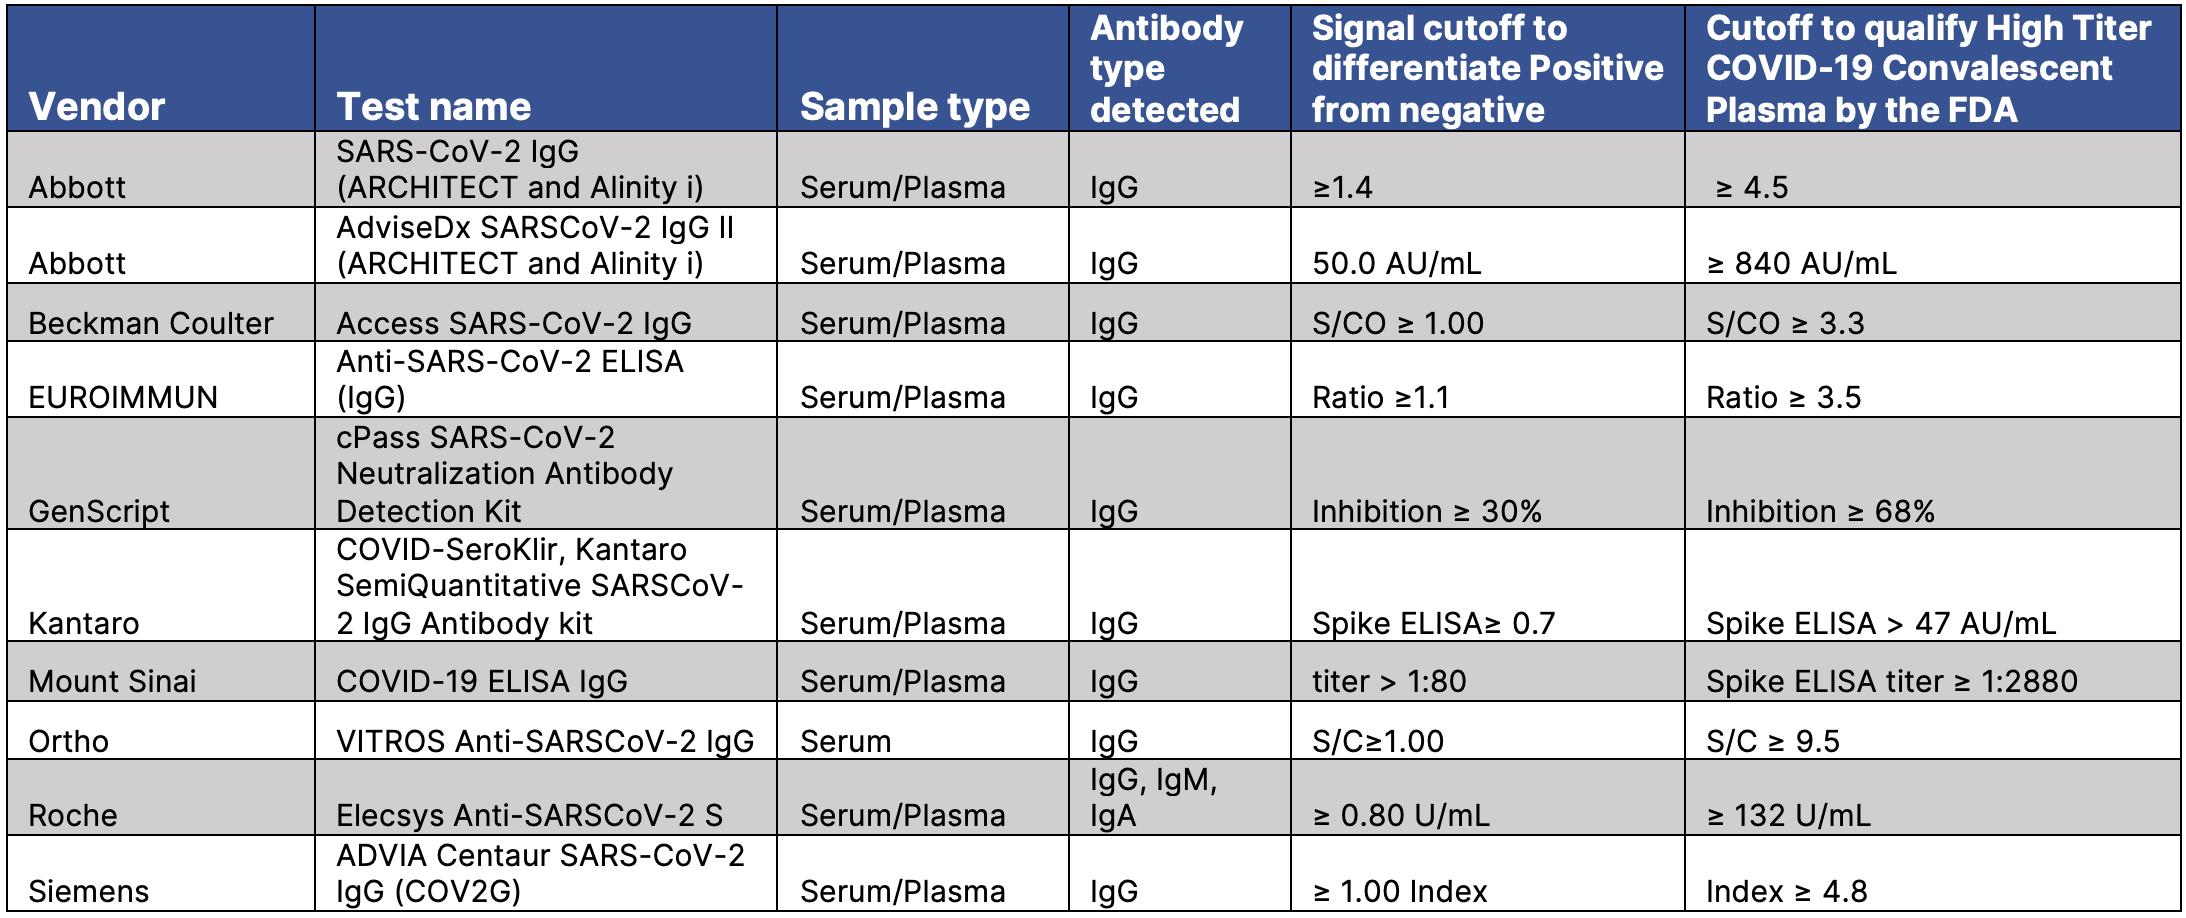 FDA authorized tests to screen the High Titer COVID-19 antibodies for Therapeutic Convalescent Plasma